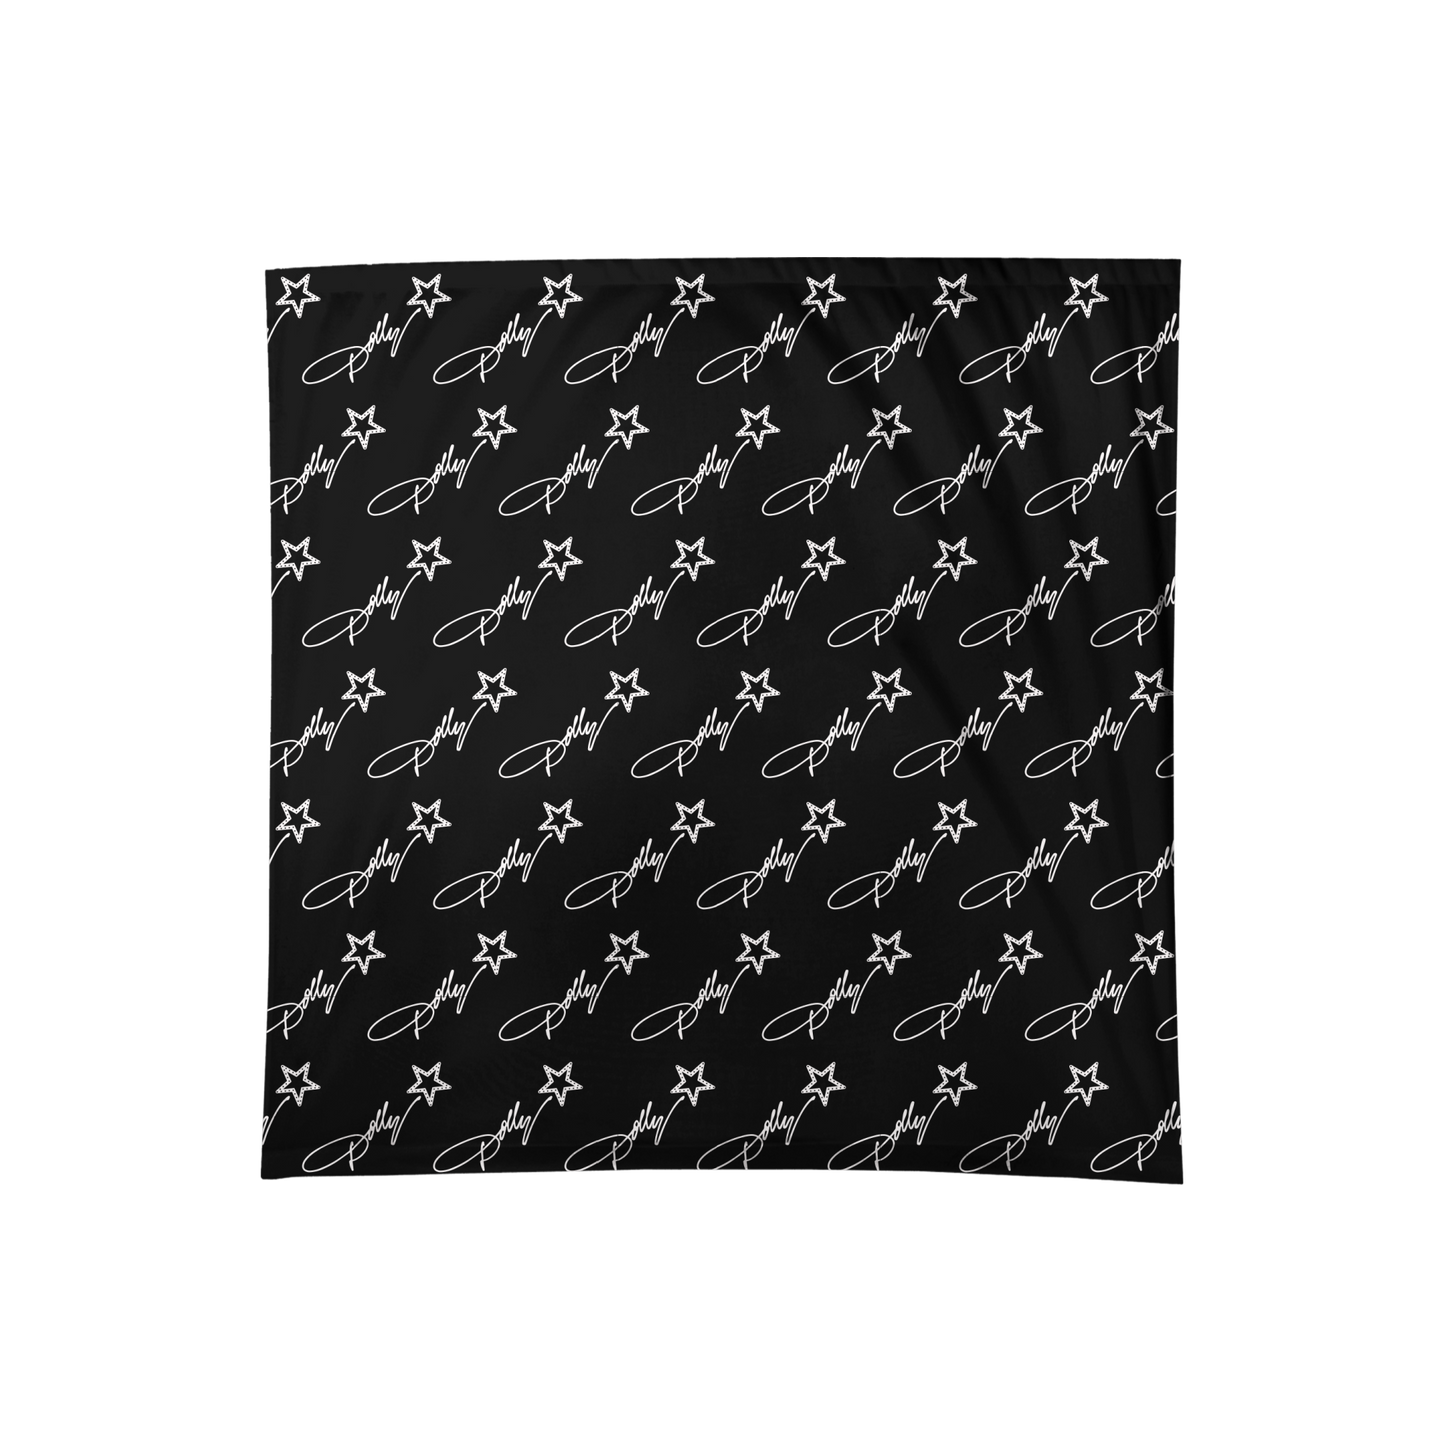 Load image into Gallery viewer, Official Dolly Parton Merchandise. 100% cotton black bandana with a white all over print Dolly Parton Rockstar logo.
